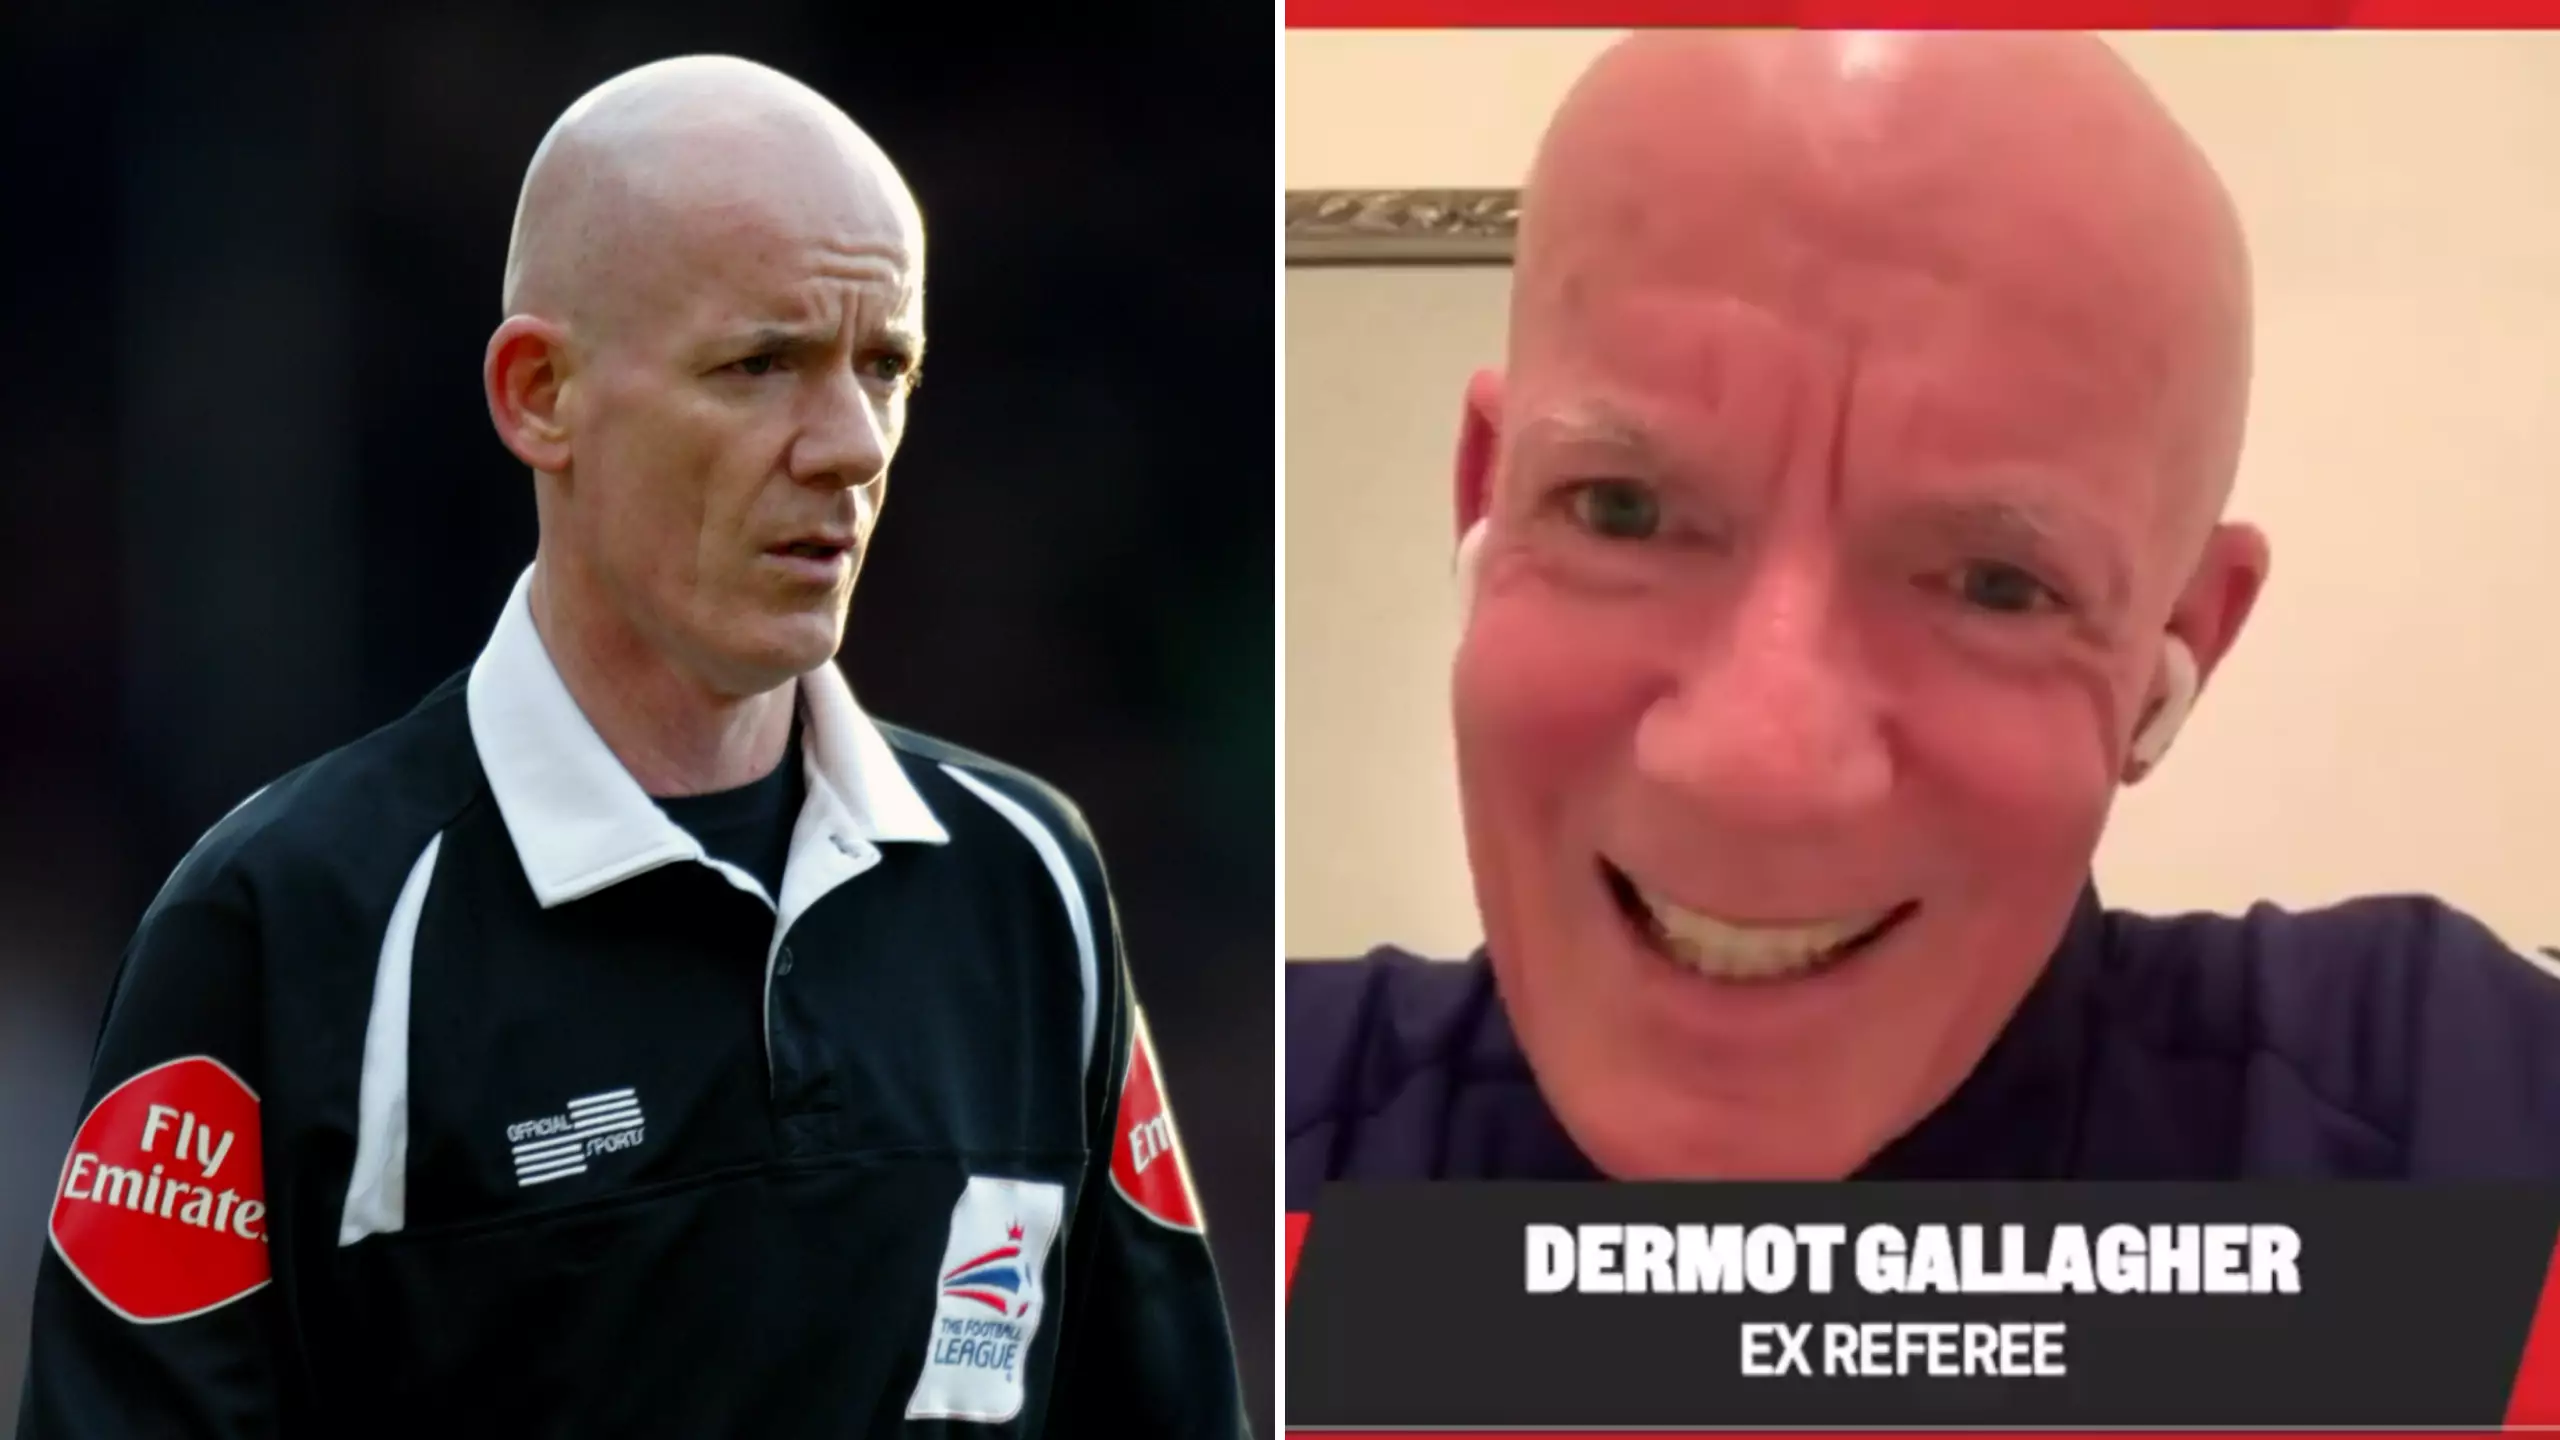 Ex-Referee Dermot Gallagher Reveals His 'Real Accent' And Fans Are Baffled